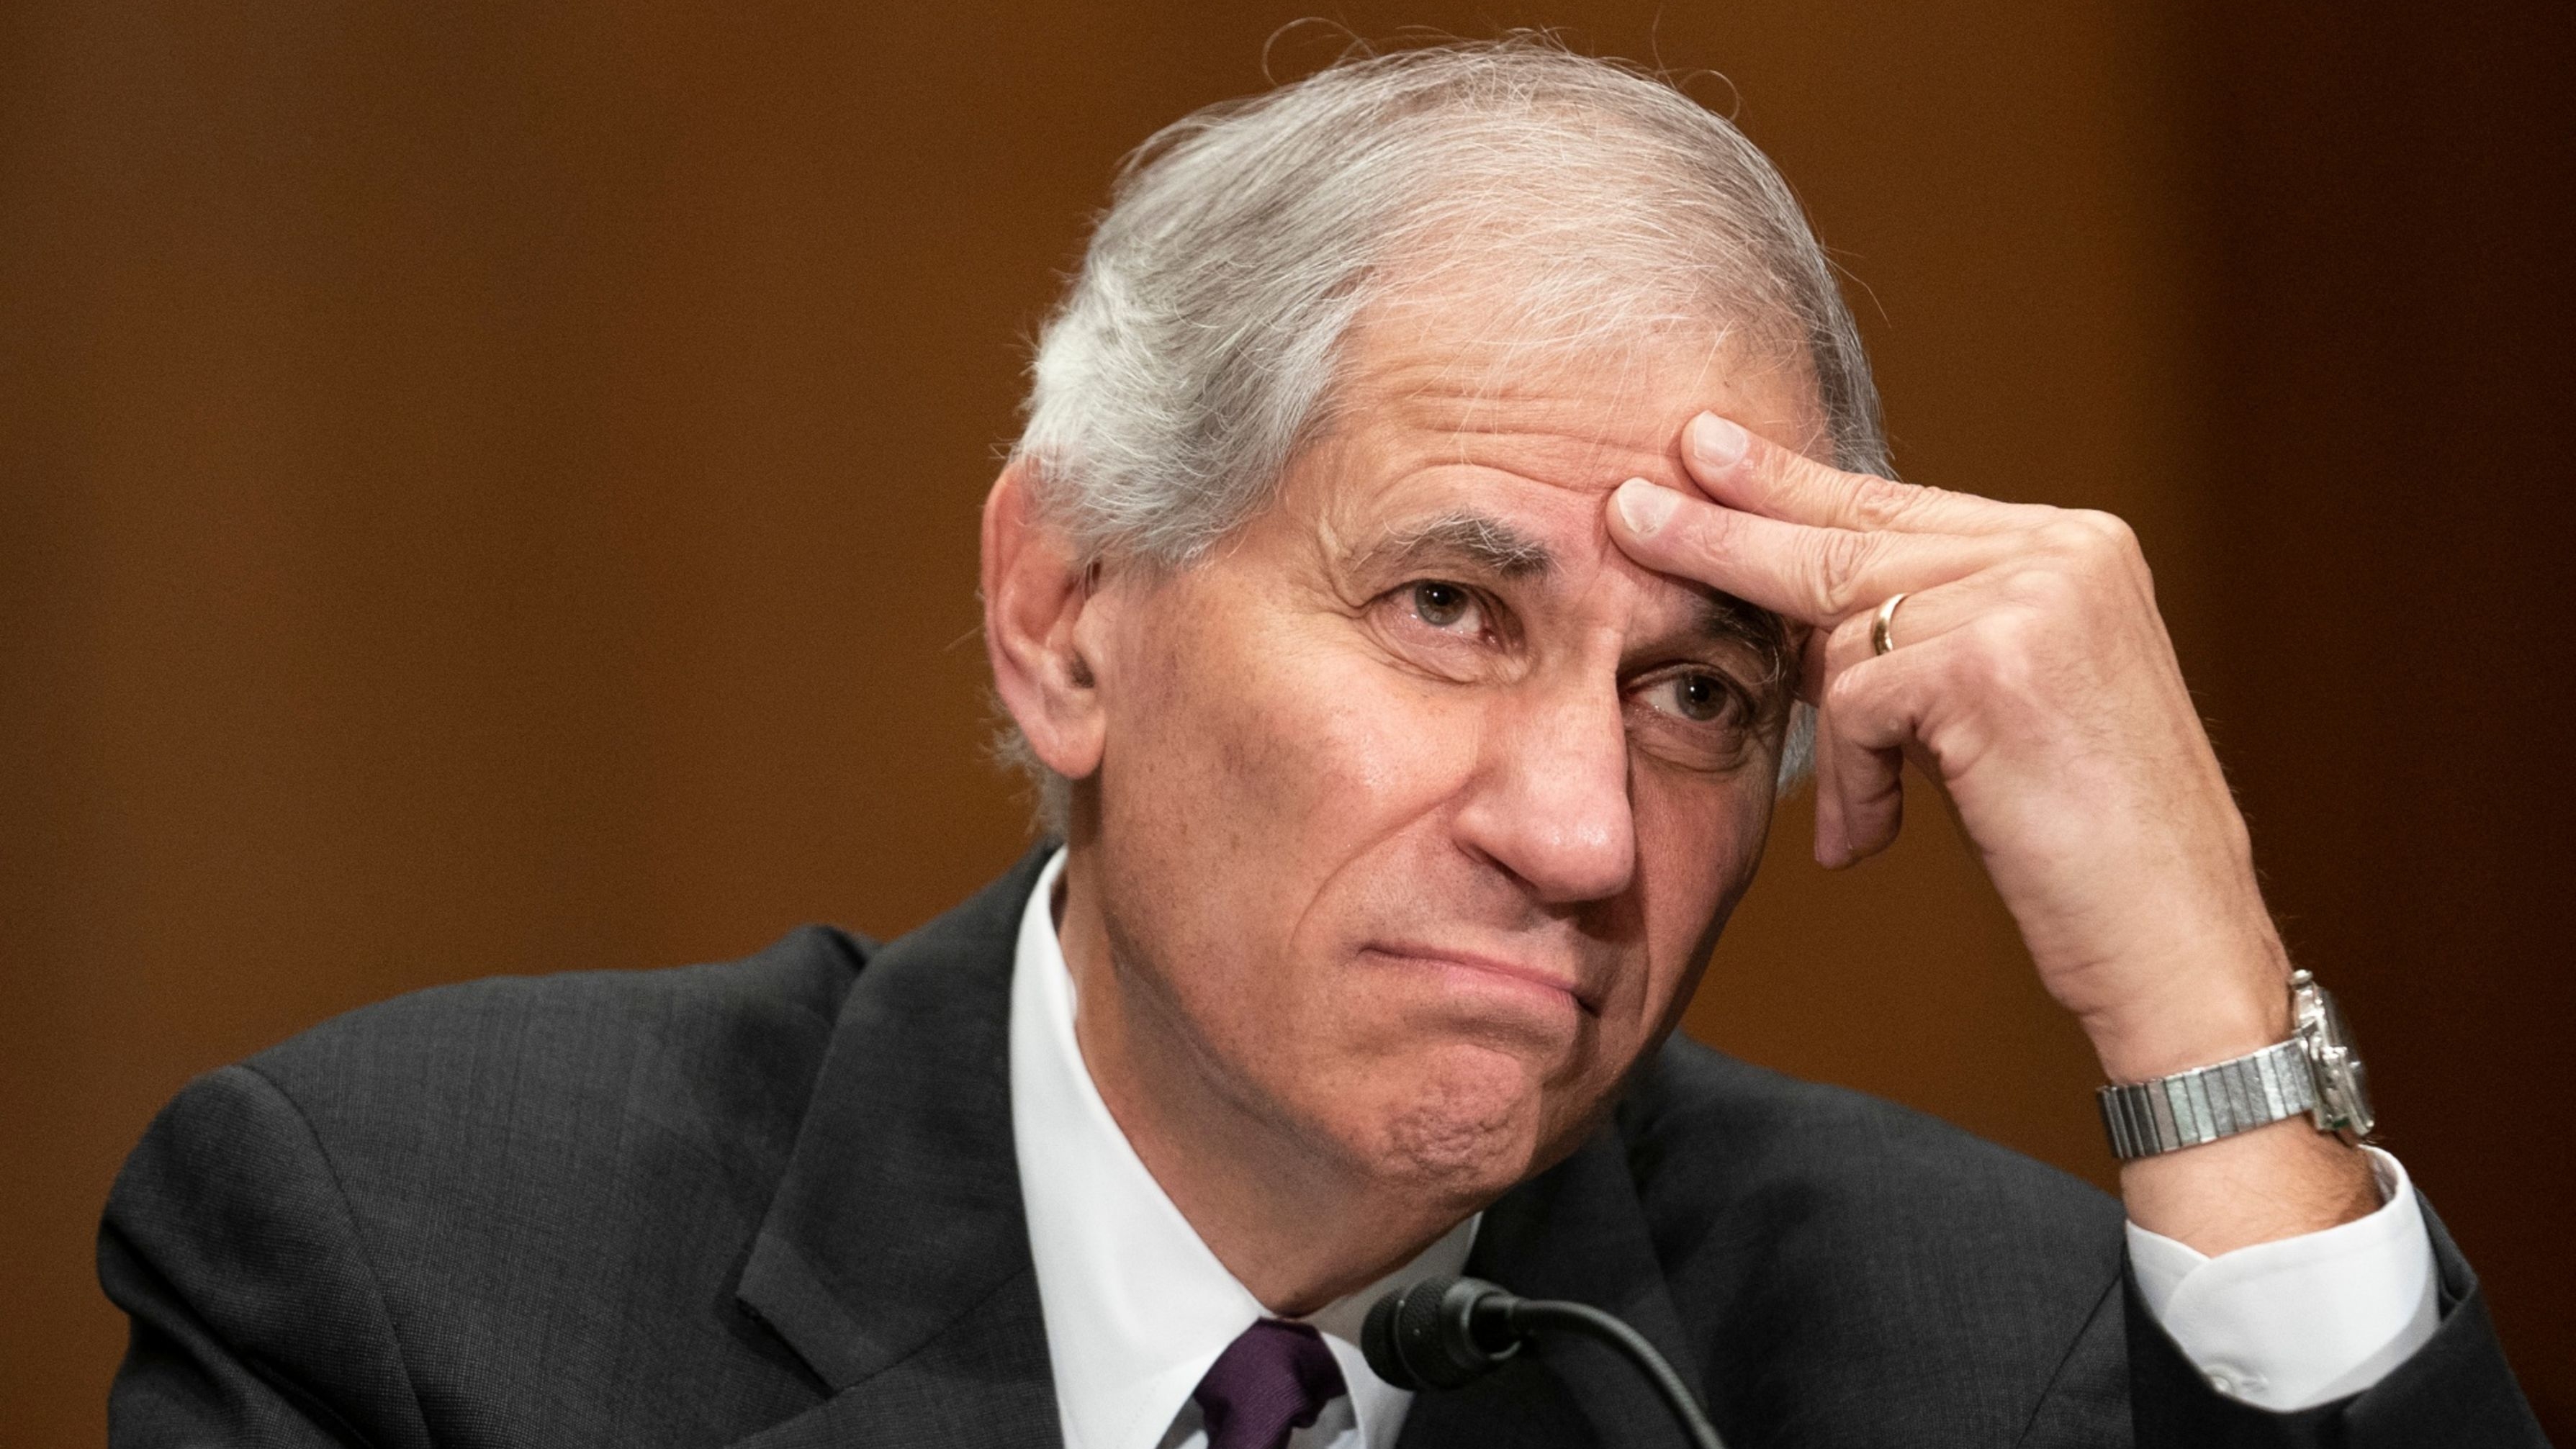 Chairman Martin Gruenberg embroiled in allegations of mishandling sexual misconduct 

Image Source: American Banker 